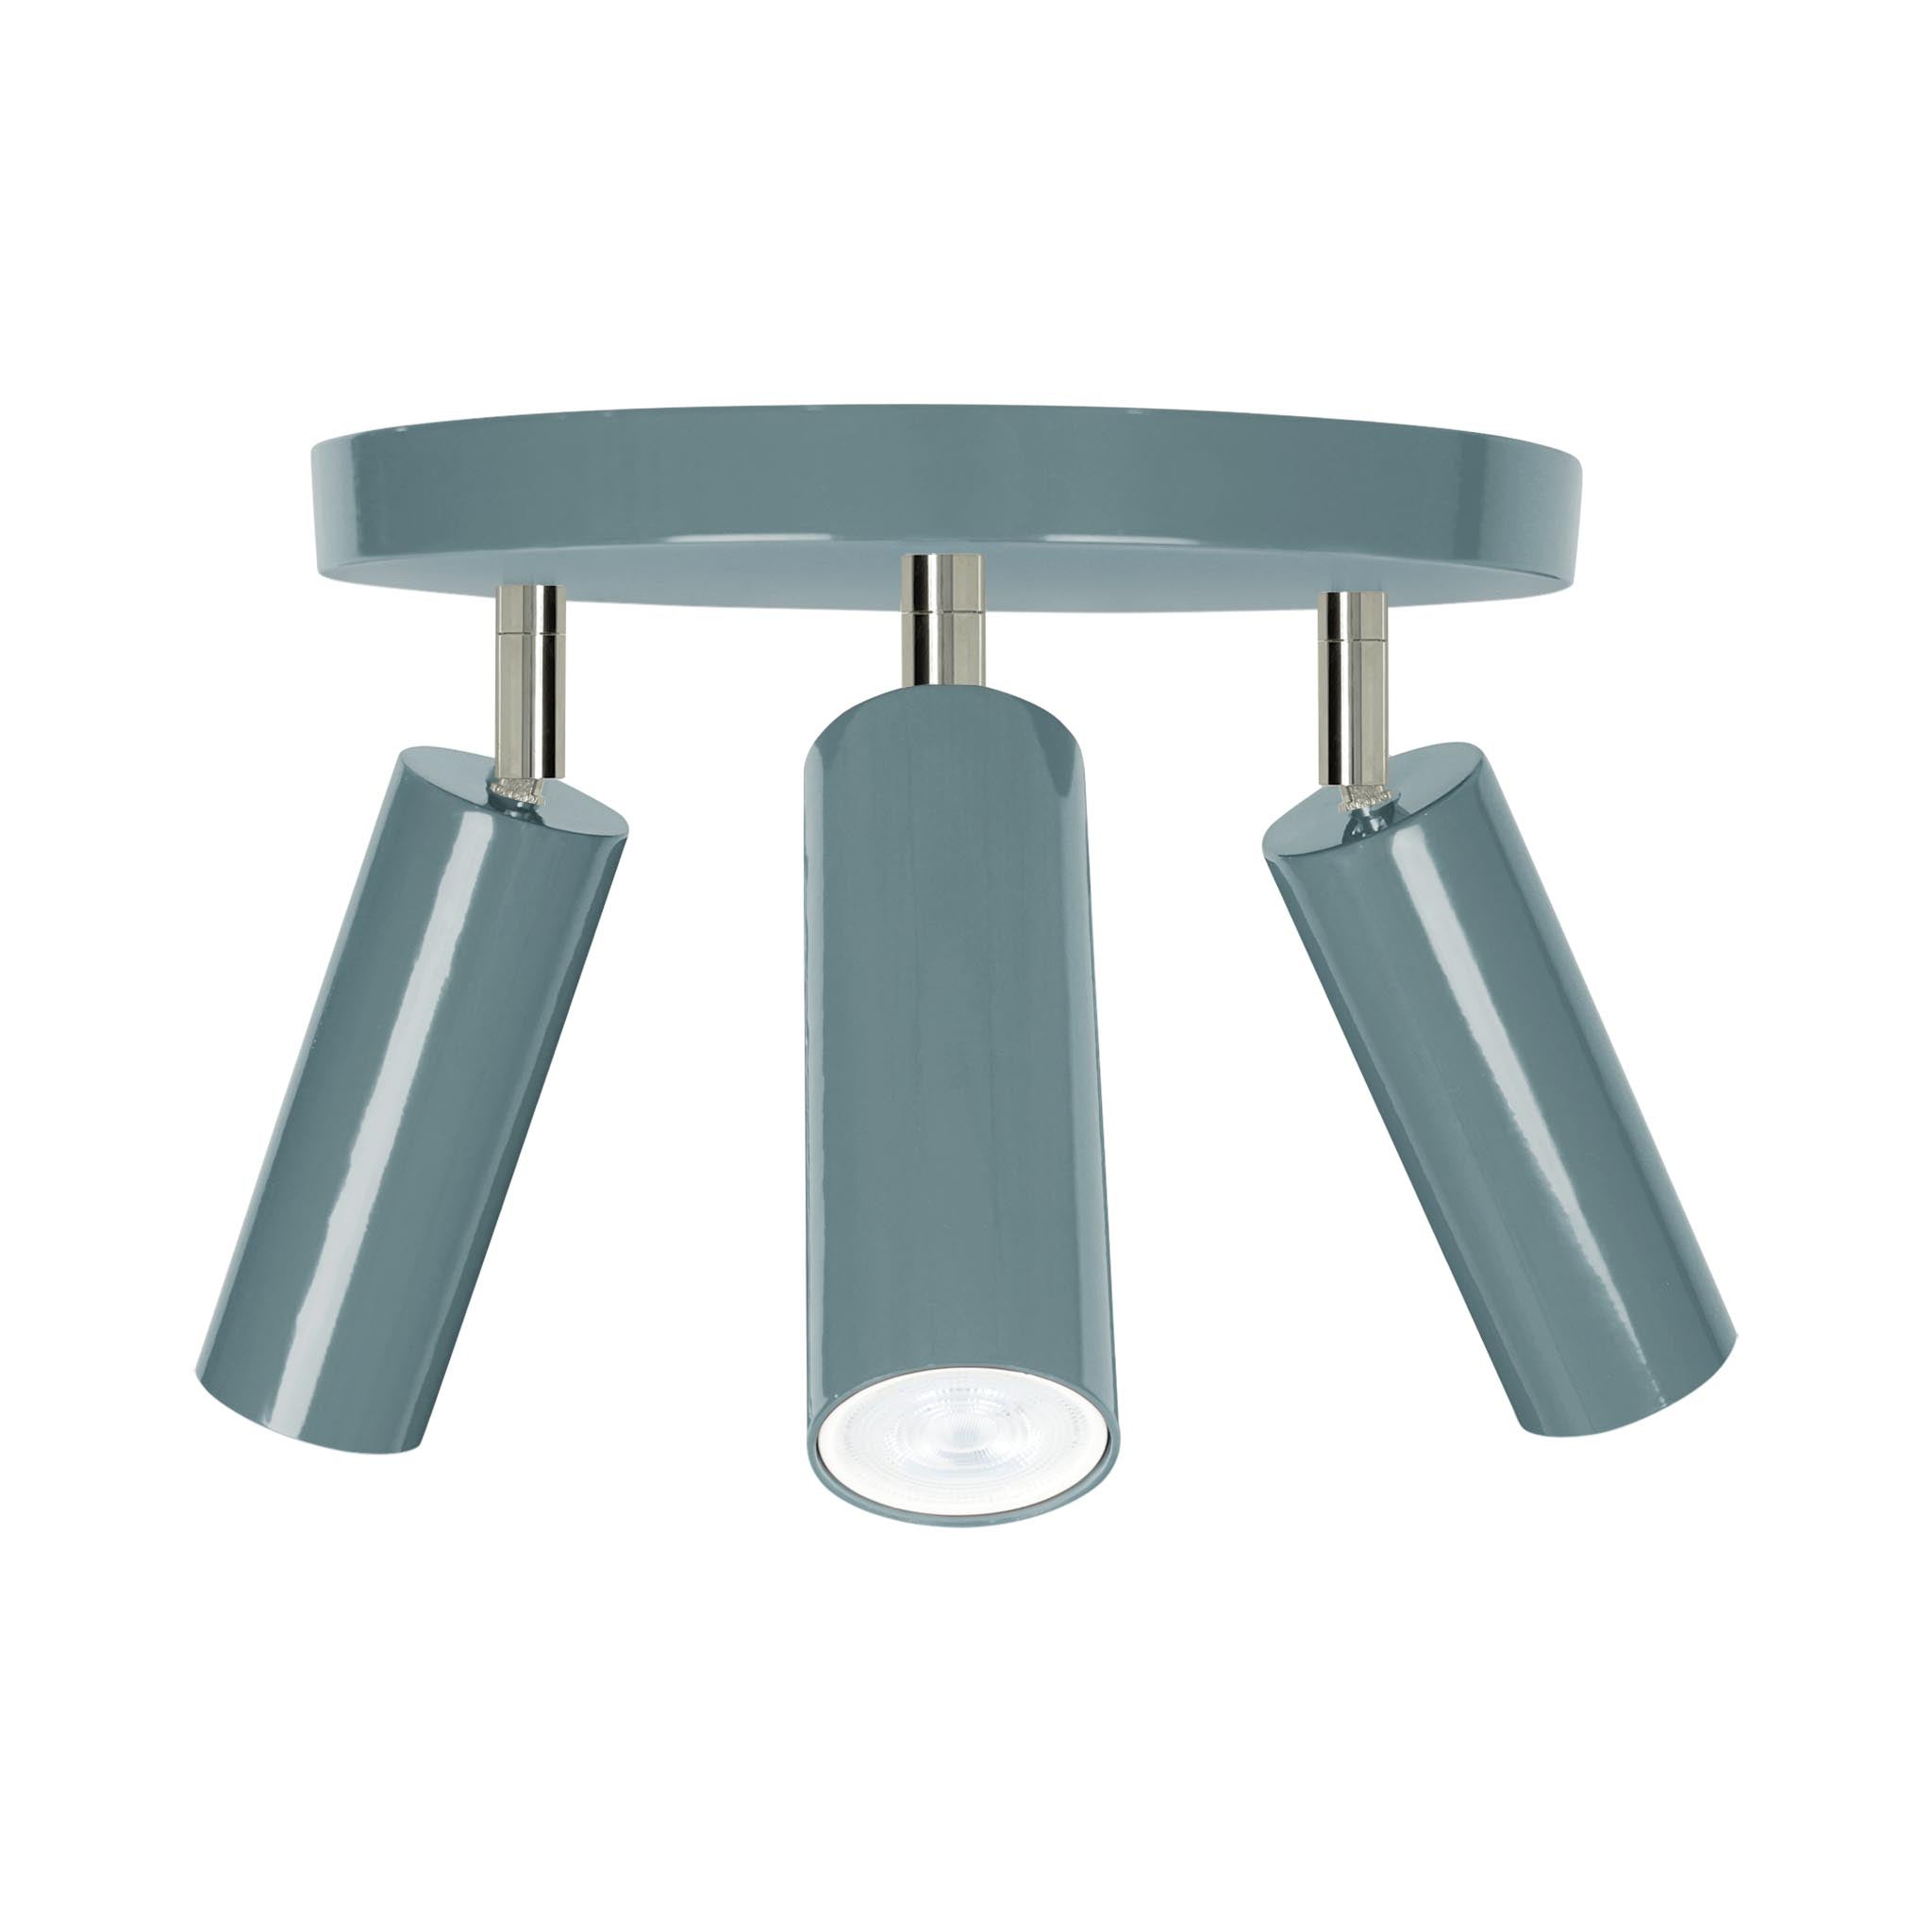 Nickel and python green color Pose flush mount Dutton Brown lighting